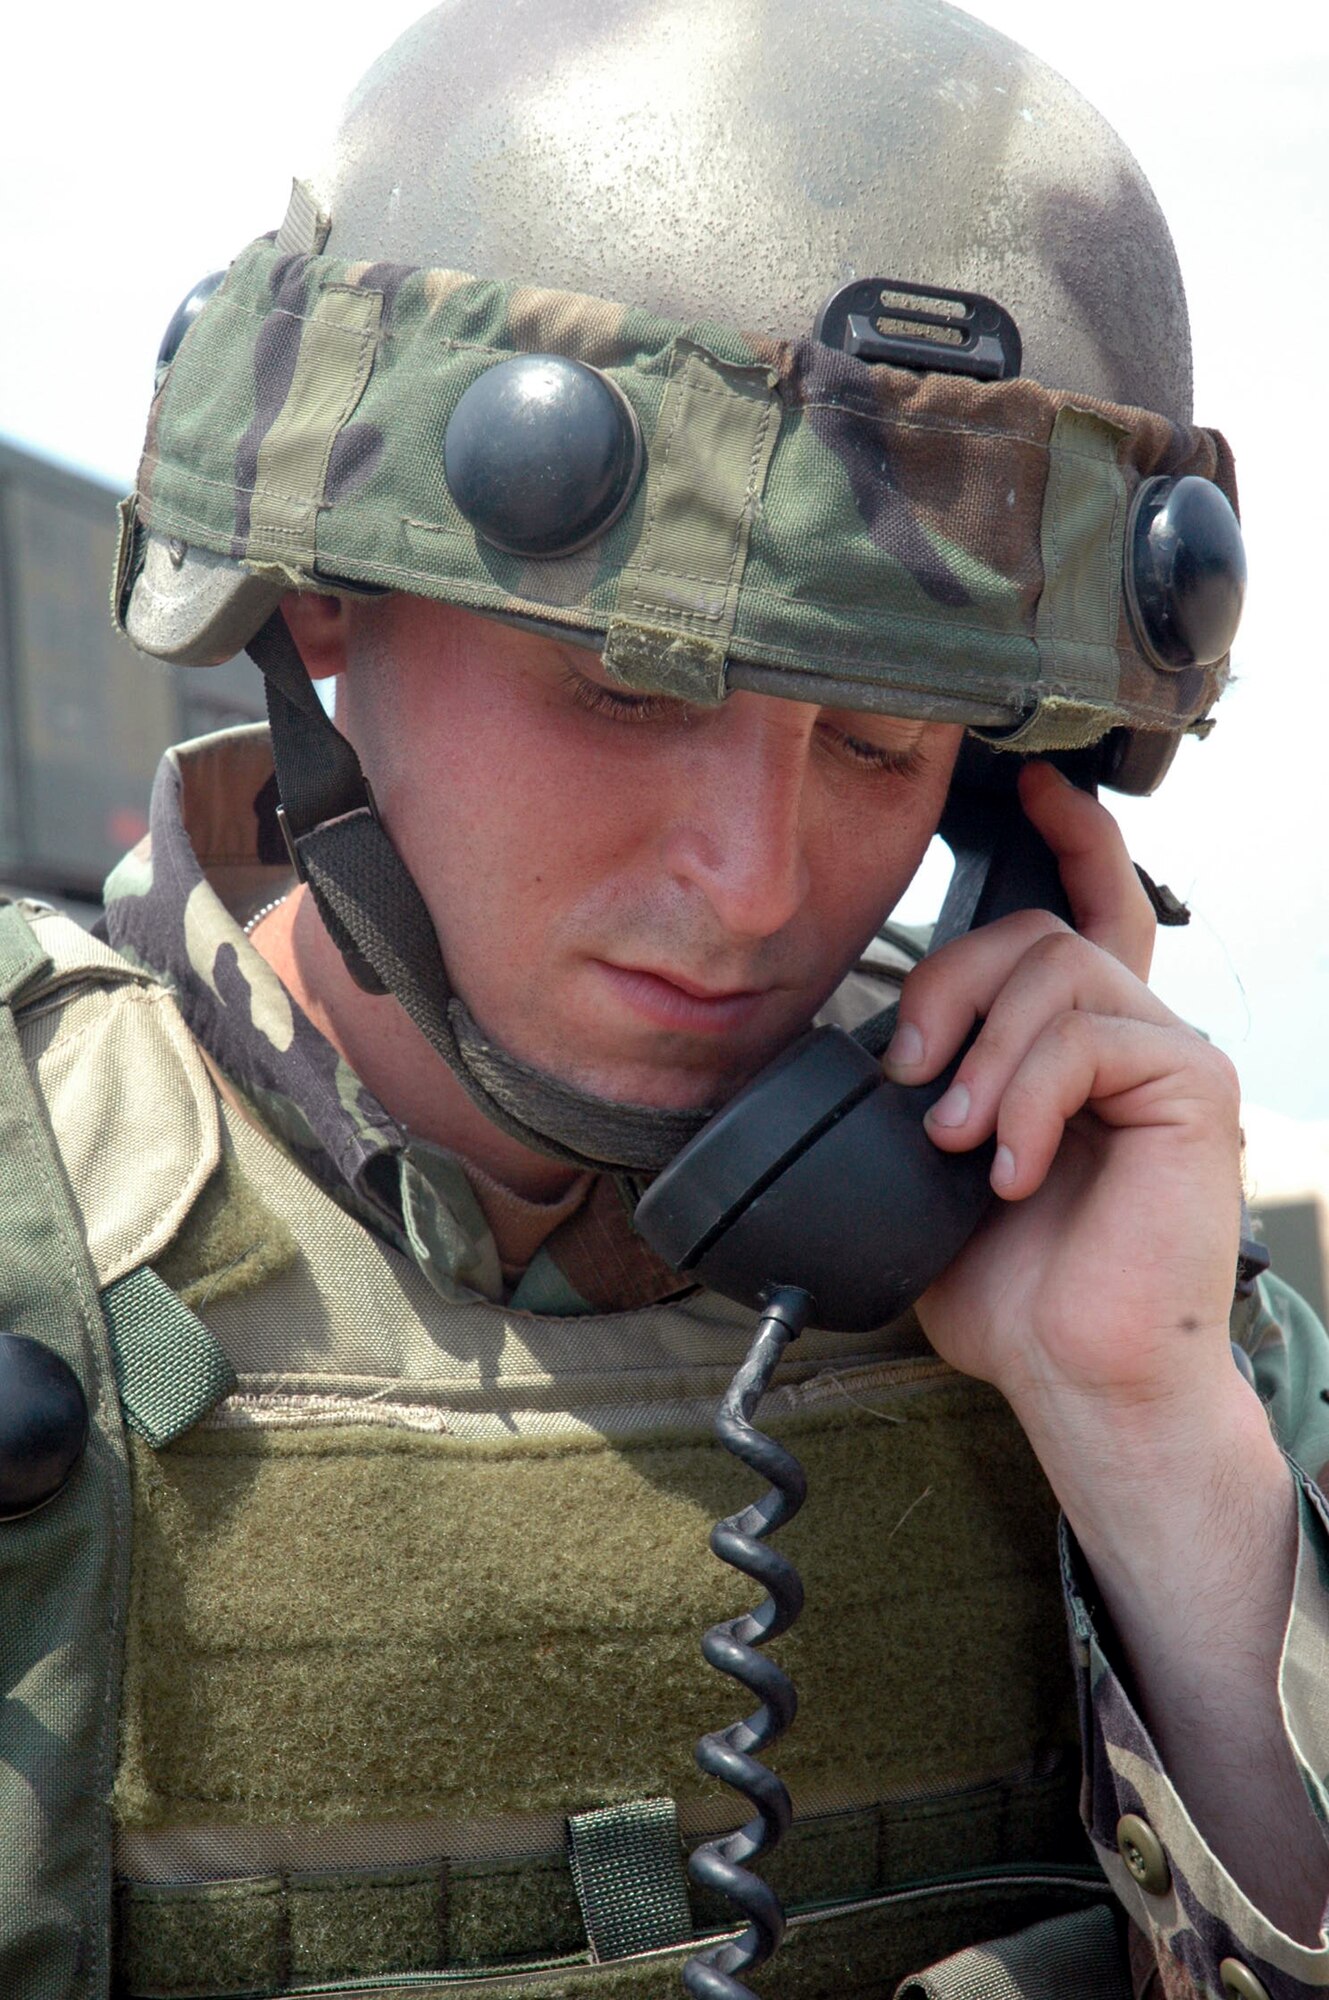 Senior Airman Thomas Sippel, 305th Security Forces Squadron, McGuire Air Force Base, N.J., talks on a field phone near a checkpoint for the contingency response group camp during operations for Air Force Exercise Eagle Flag 07-6 at Naval Air Engineering Lakehurst, N.J.  Airman Sippel deployed to Eagle Flag with the 816th Contingency Response Group, also from McGuire.  The exercise is operated by the U.S. Air Force Expeditionary Center's 421st Combat Training Squadron from Fort Dix, N.J.  (U.S. Air Force Photo/Tech. Sgt. Scott T. Sturkol)